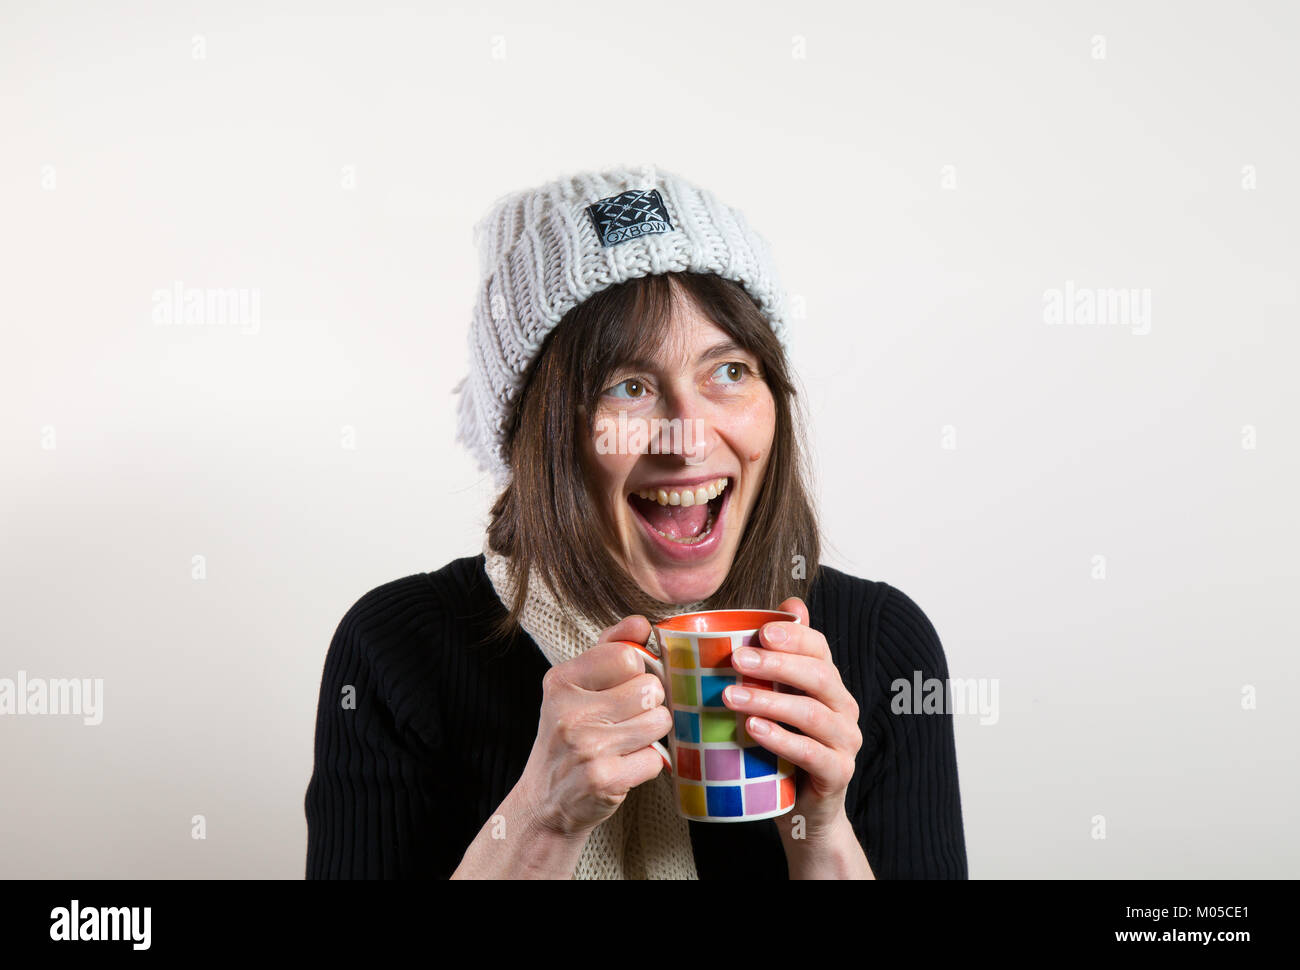 Portrait of happy female in woolly hat laughing (mouth open wide) holding mug, warming hands. Excited, cheesy grin showing teeth. Stock Photo